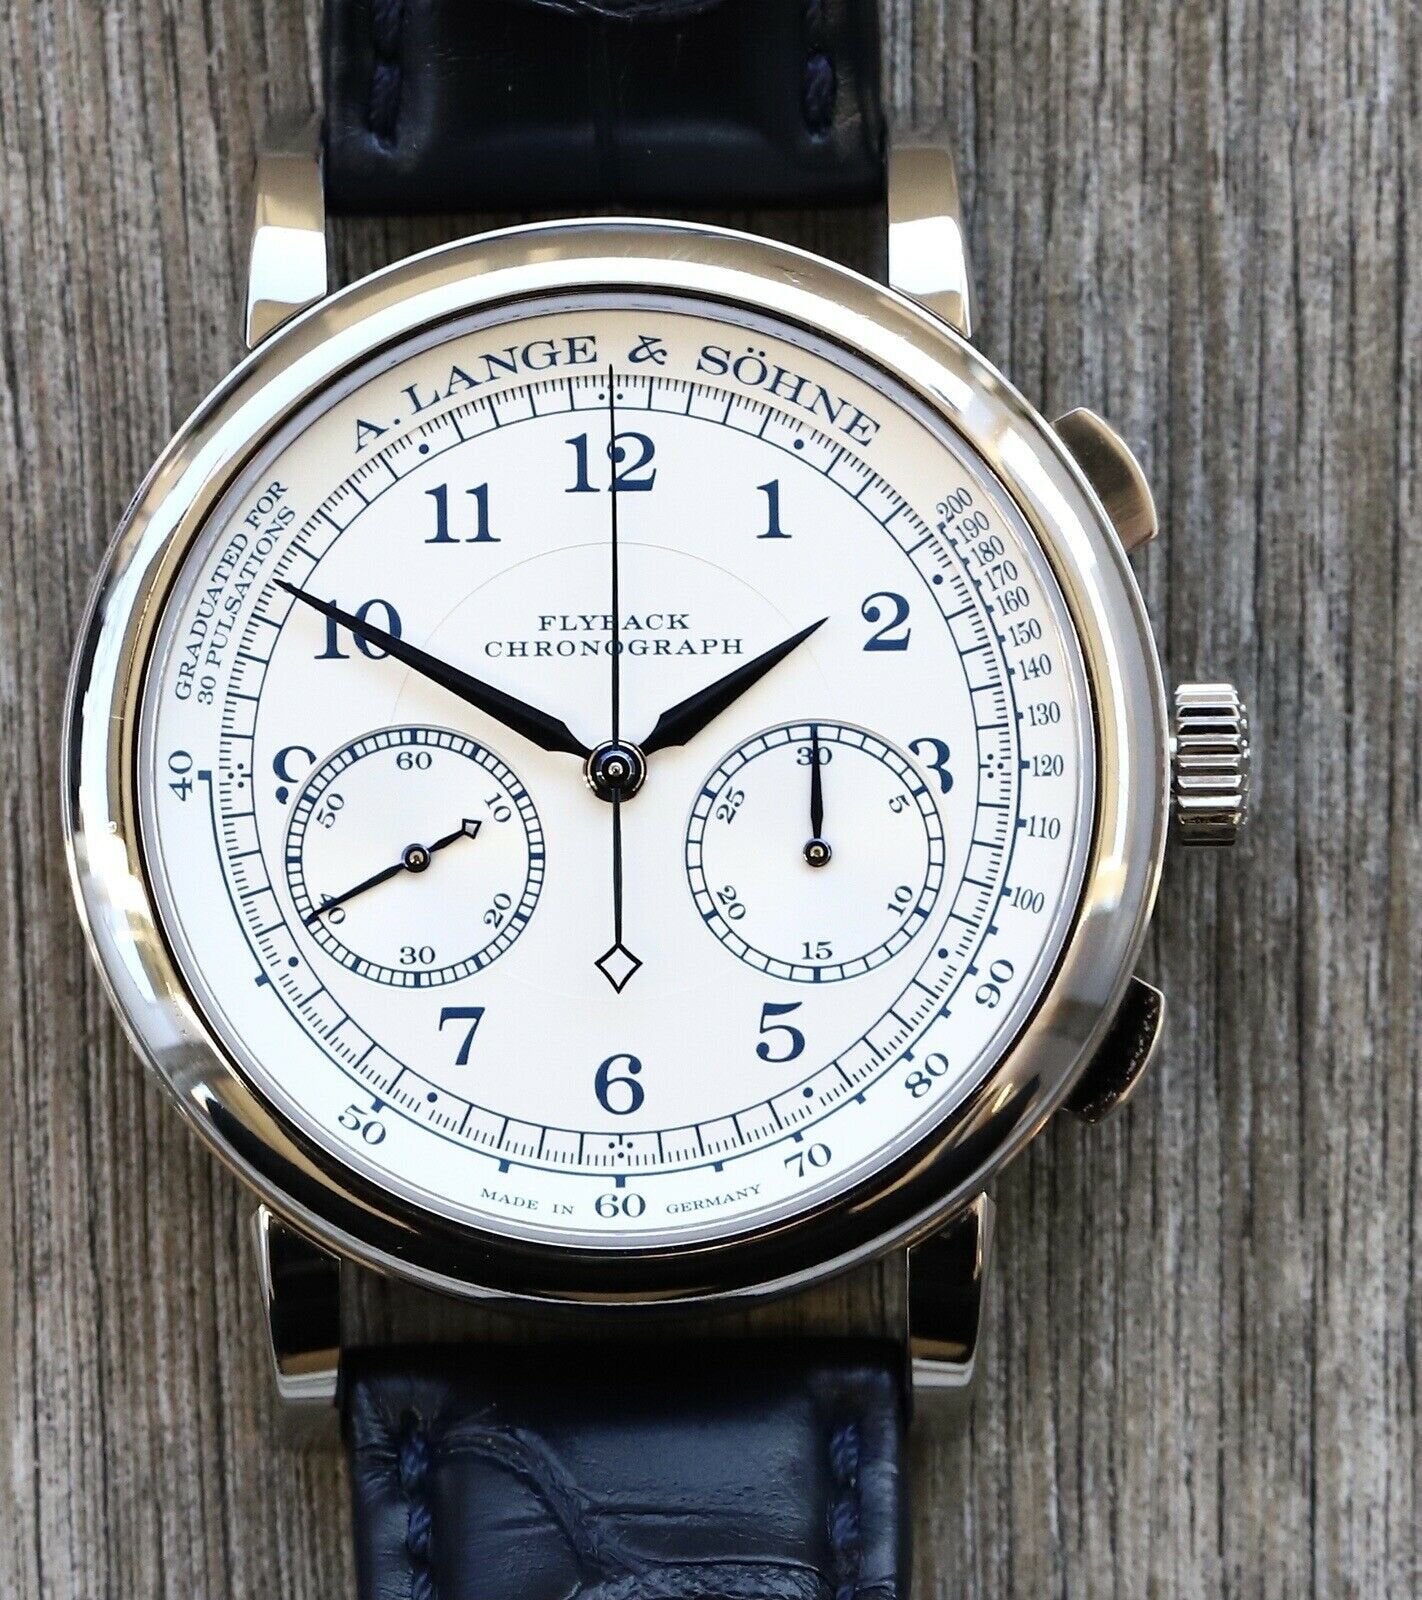 A._Lange_and_Sohne_1815_Flyback_Chrono_Boutique_Edition_414.026_18K_White_Gold_Watch_Vault_01.jpg